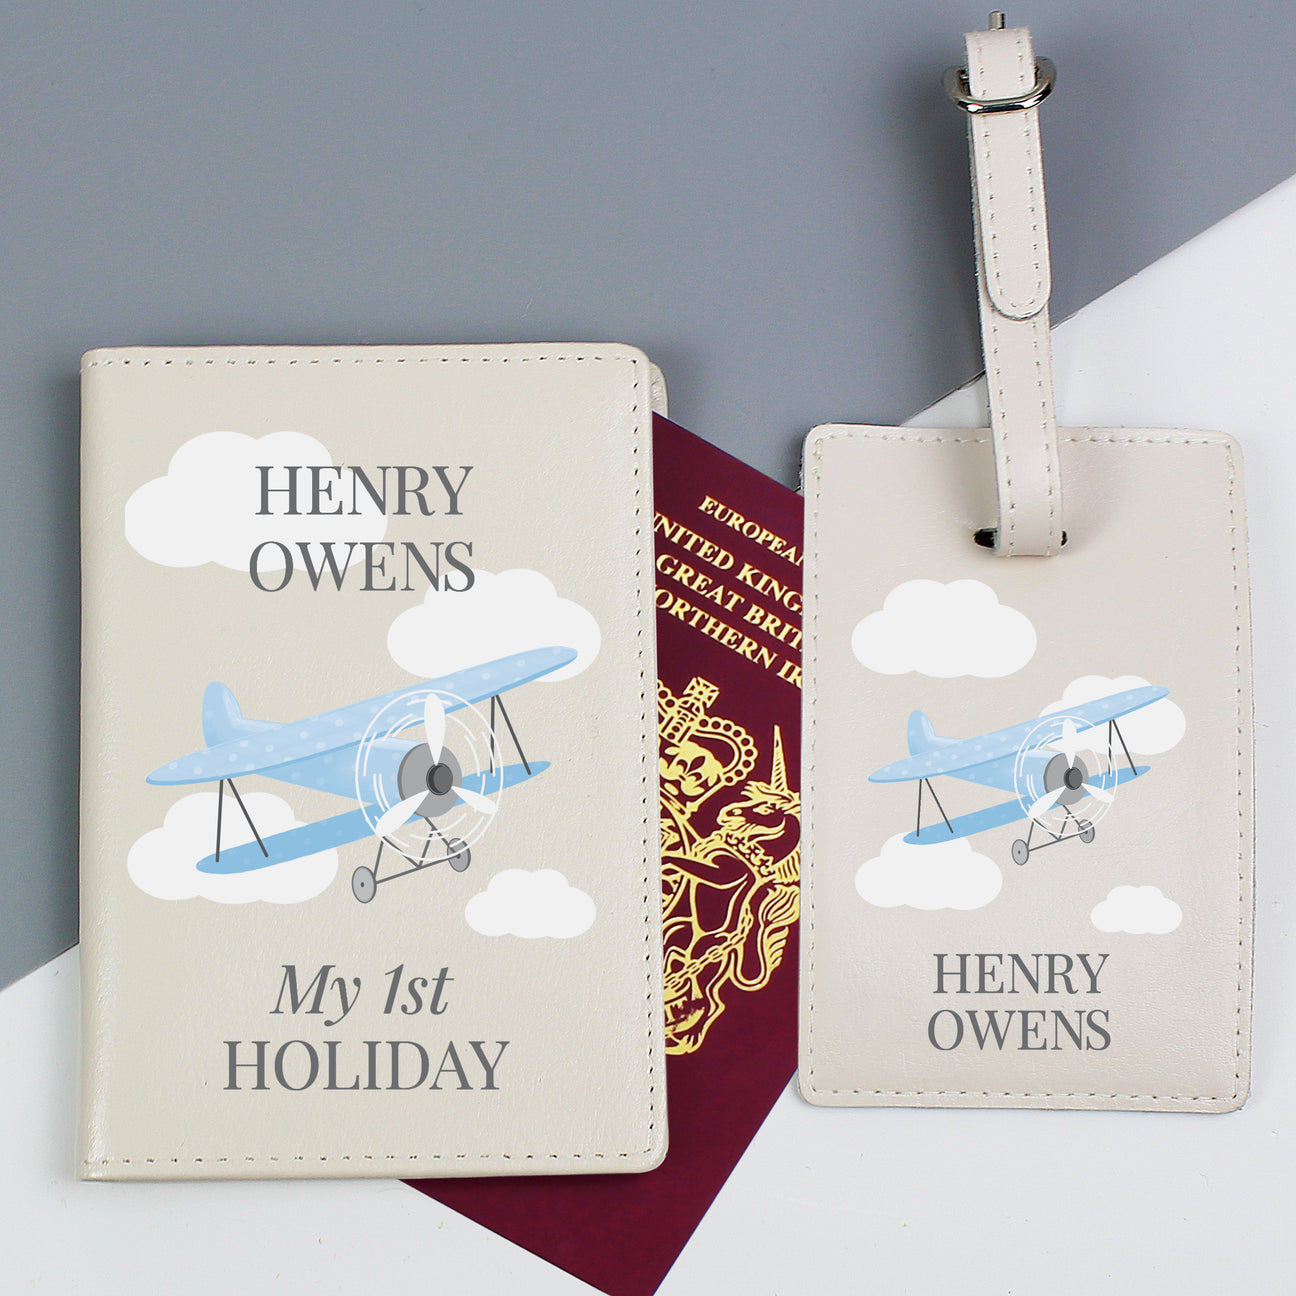 Personalised Travel Gifts - Gift Moments